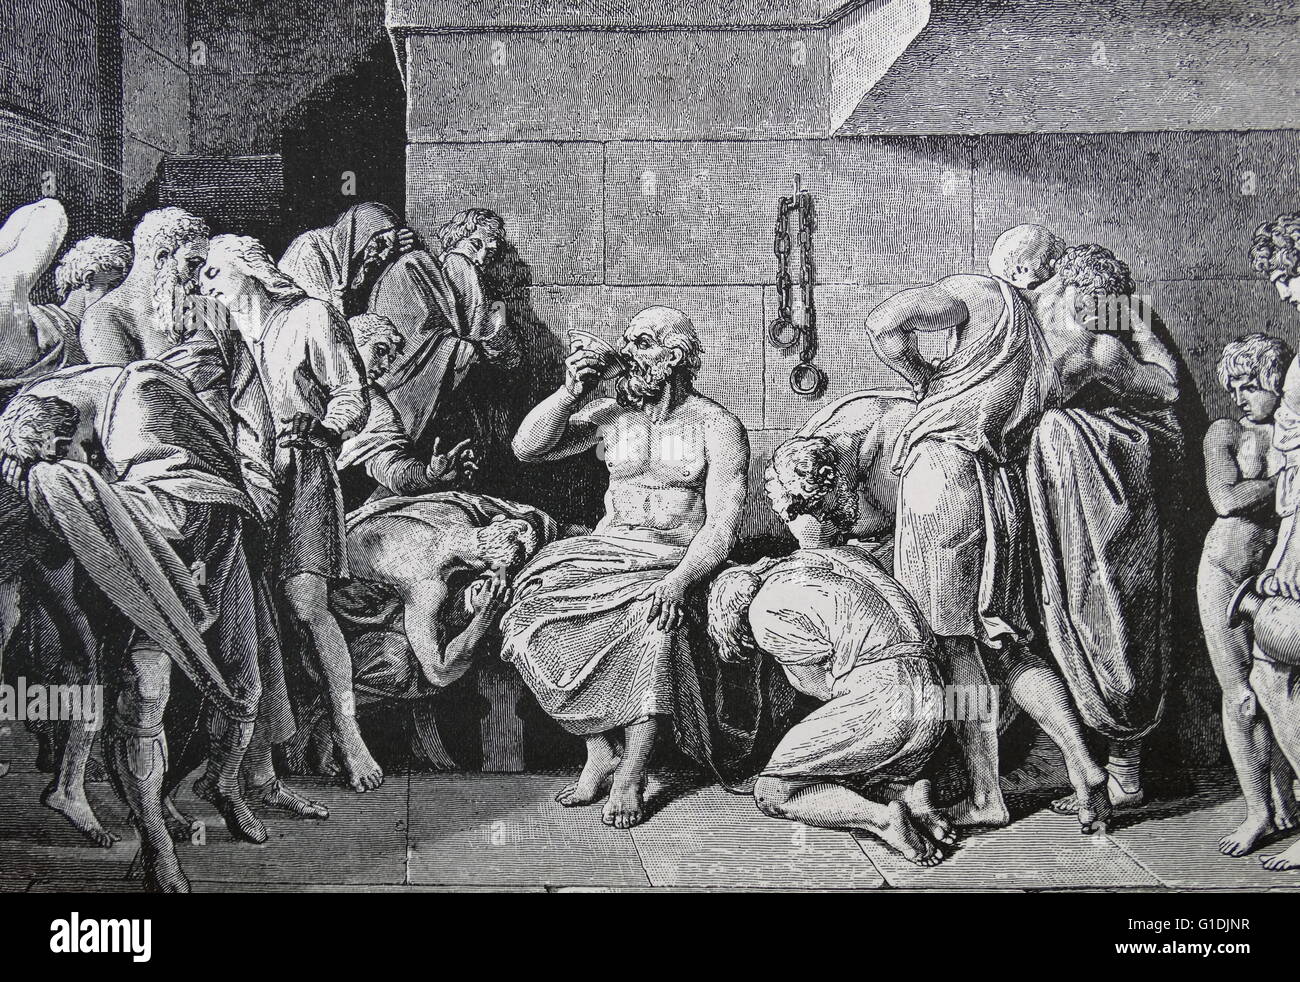 Illustration depicting the death of Socrates, a classical Greek philosopher credited as one of the founders of Western philosophy Stock Photo